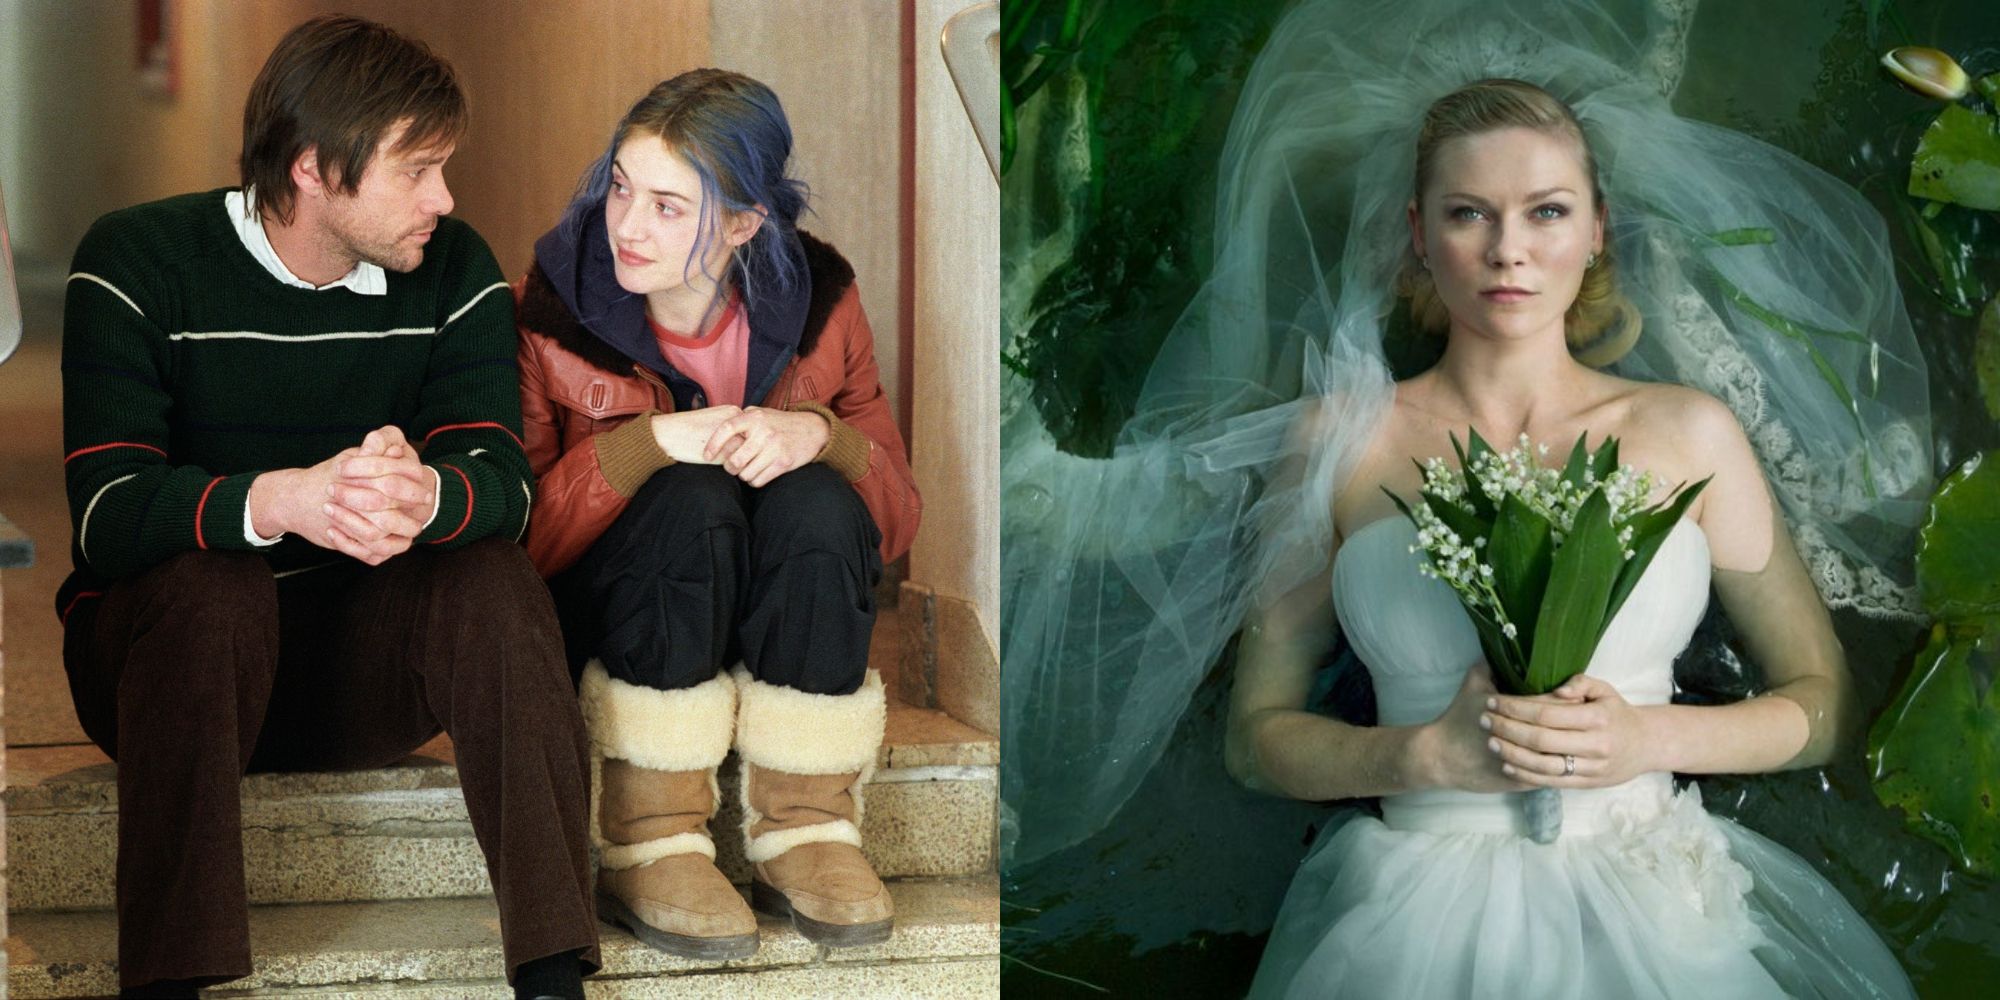 Split image showing the main characters from Eternal Sunshine and Melancholia.